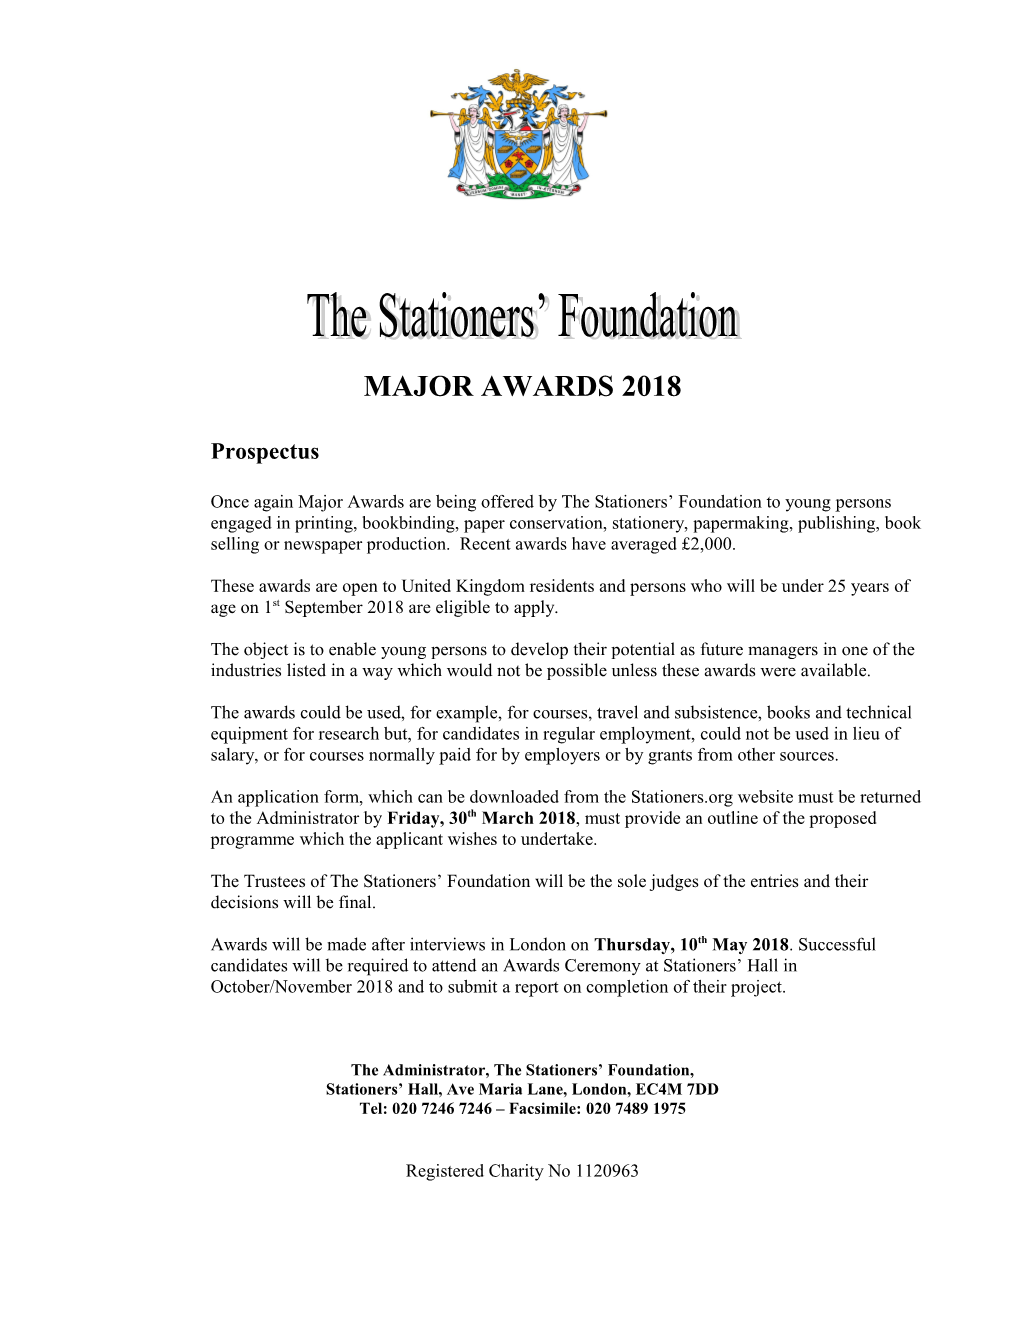 Once Again Major Awards Are Being Offered by the Stationers Foundation to Young Persons